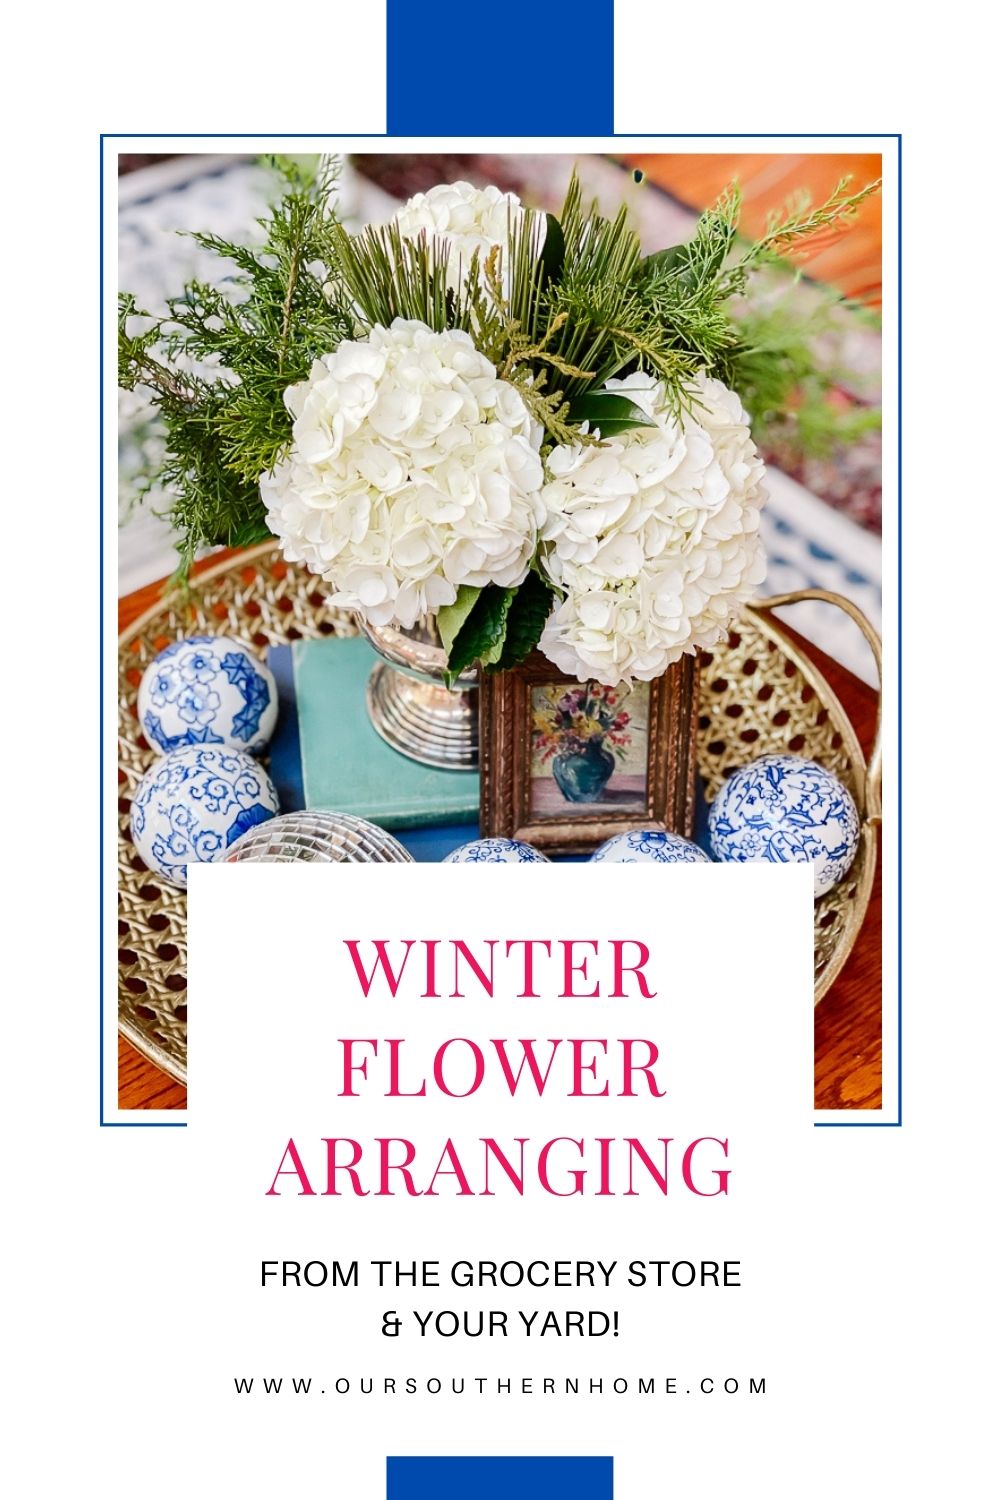 winter flower arranging with blue and white accents